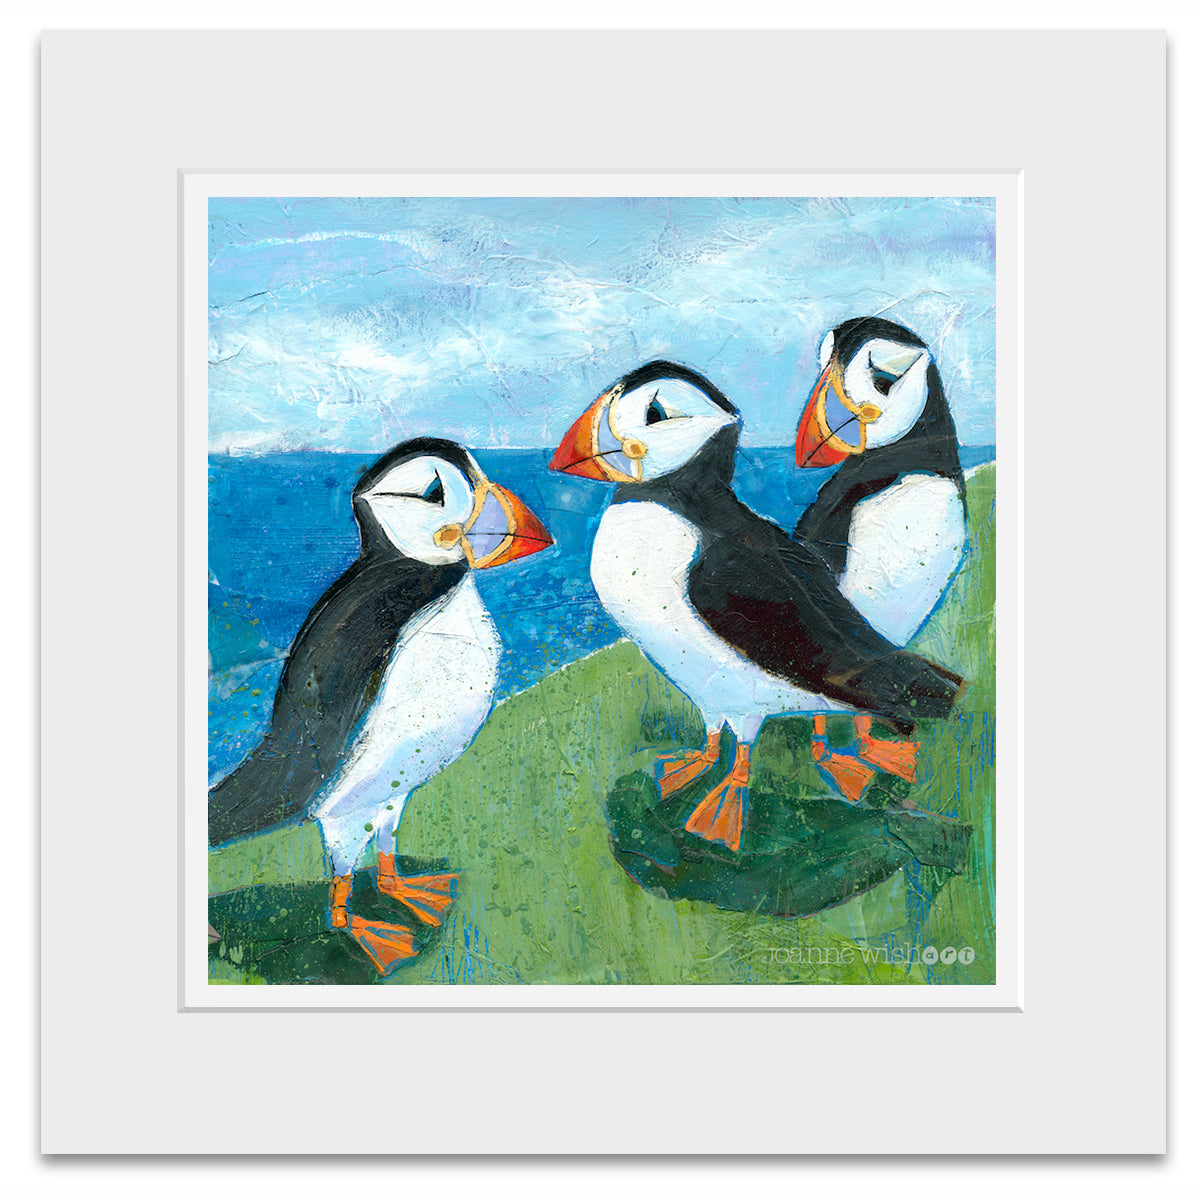 A mounted art print of three quirky puffins chatting on a grassy ledge above the north east sea.